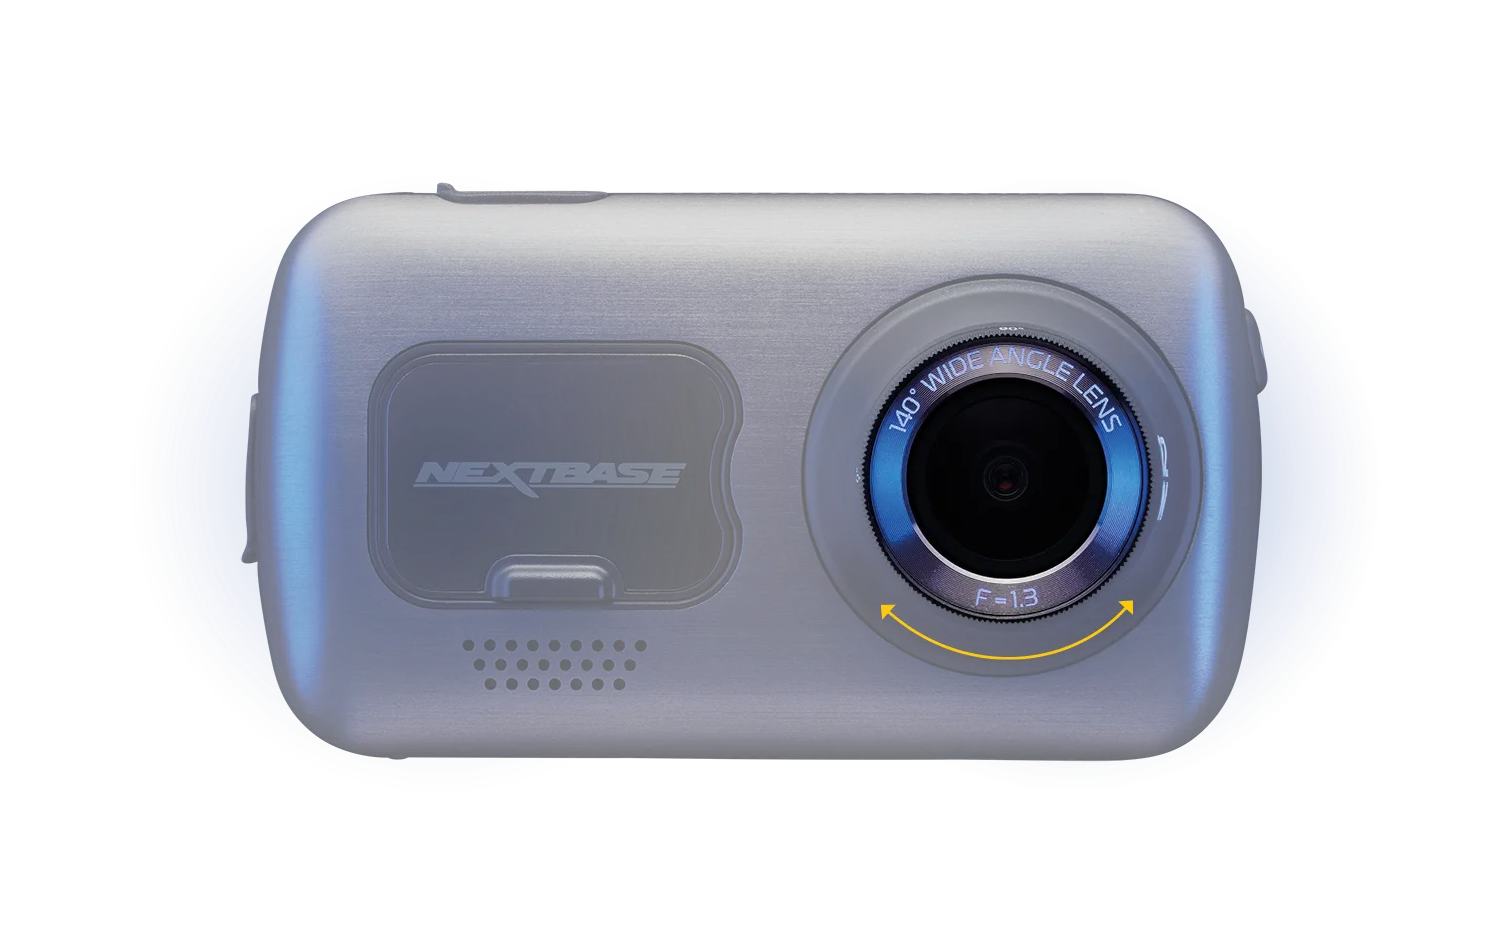 How to install a dash cam - Nextbase - United States